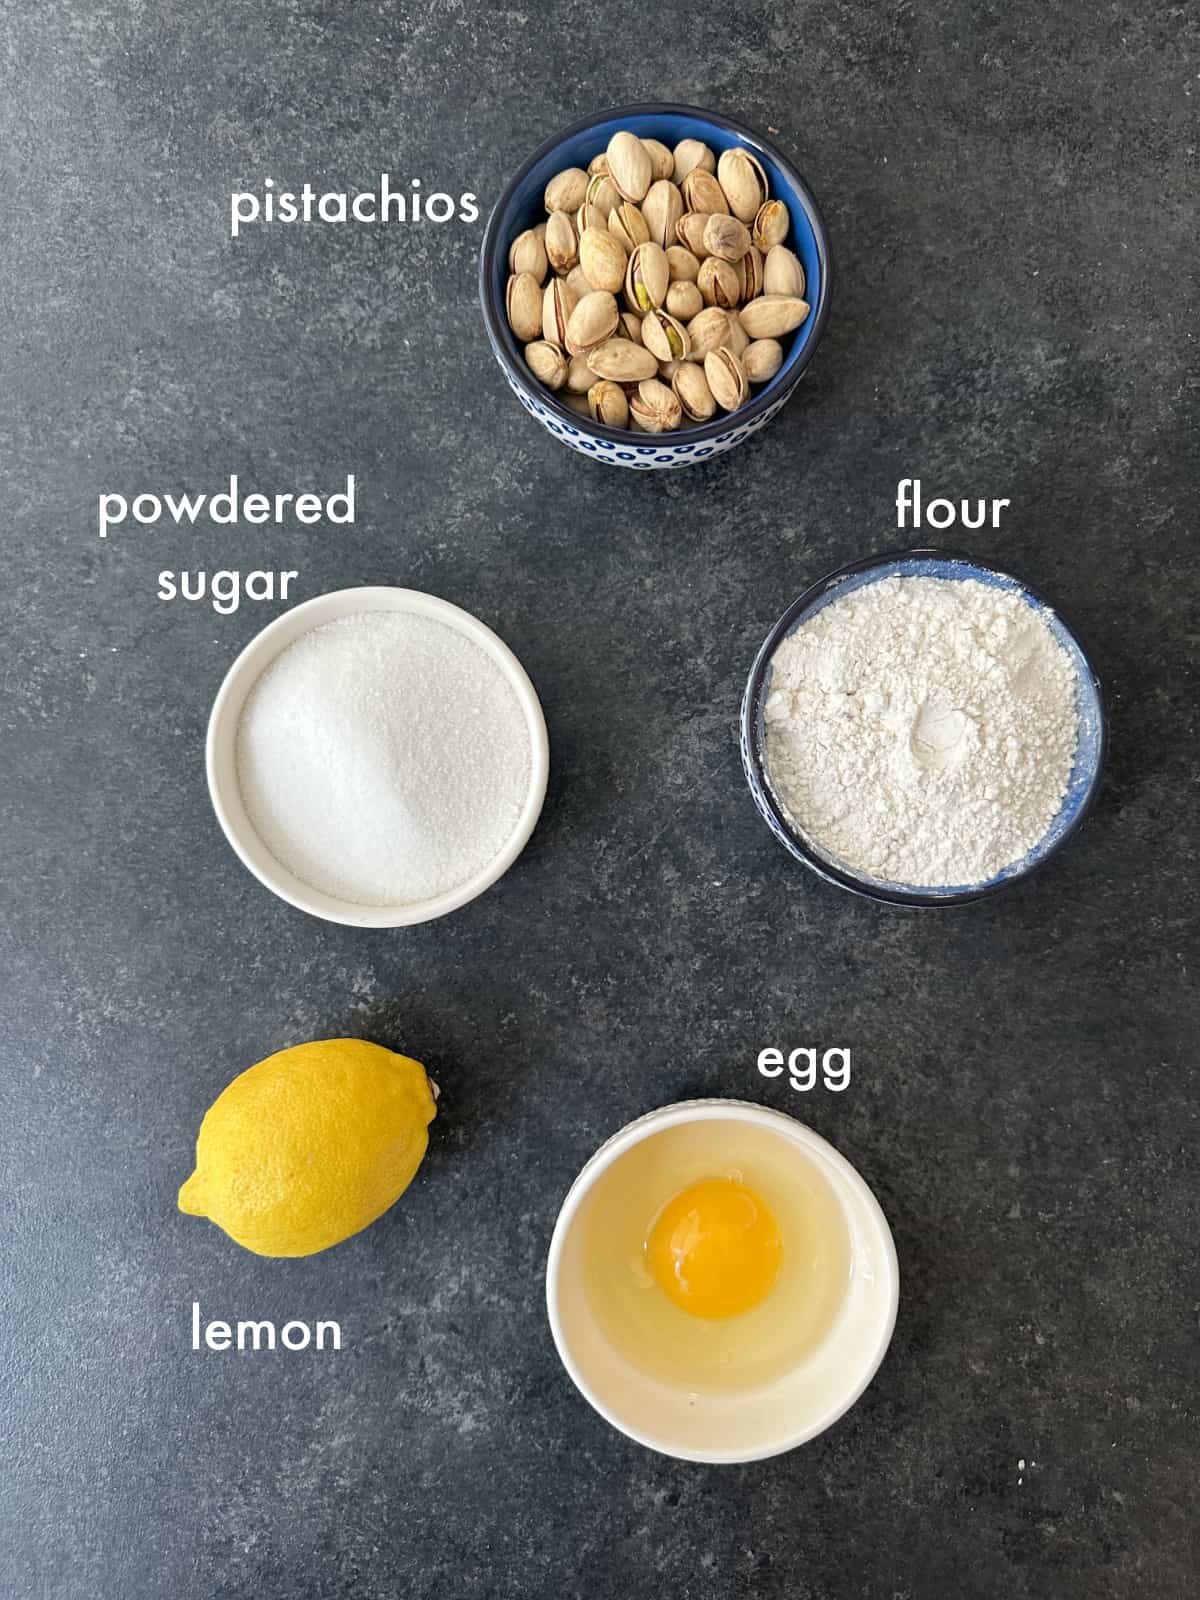 To make this recipe you need pistachios, powdered sugar, flour, egg and lemon. 